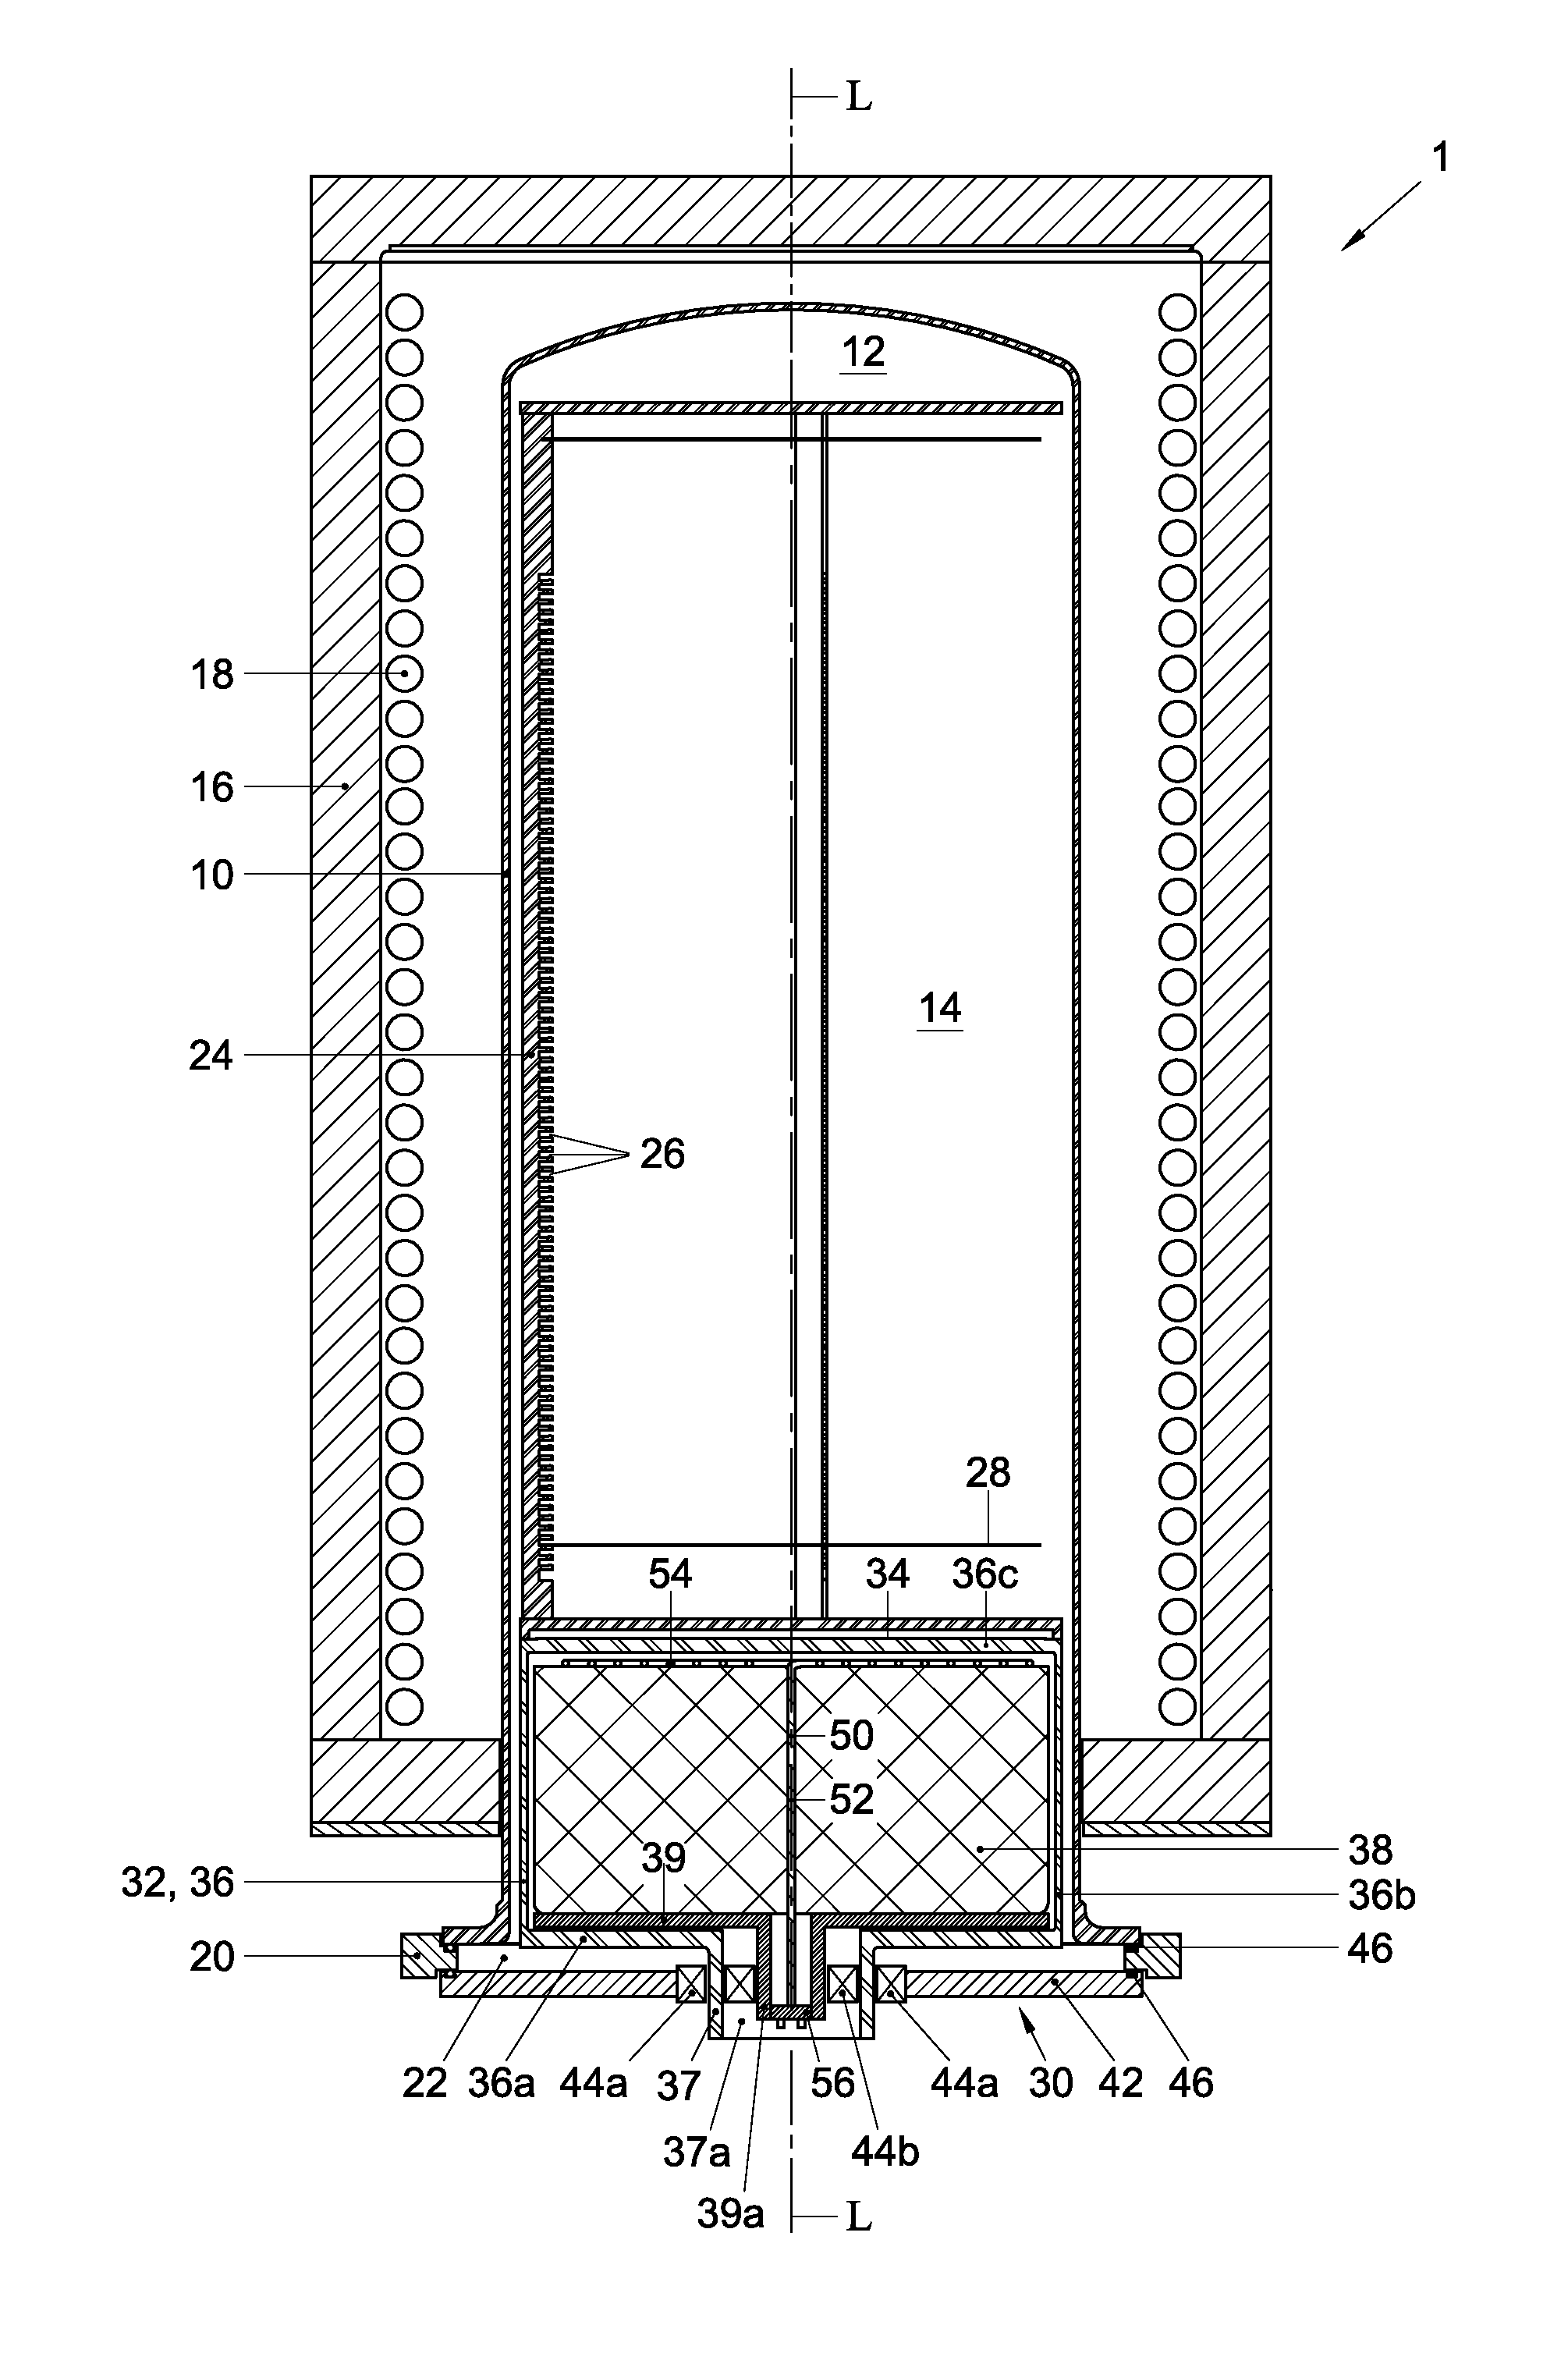 Wafer processing apparatus with heated, rotating substrate support